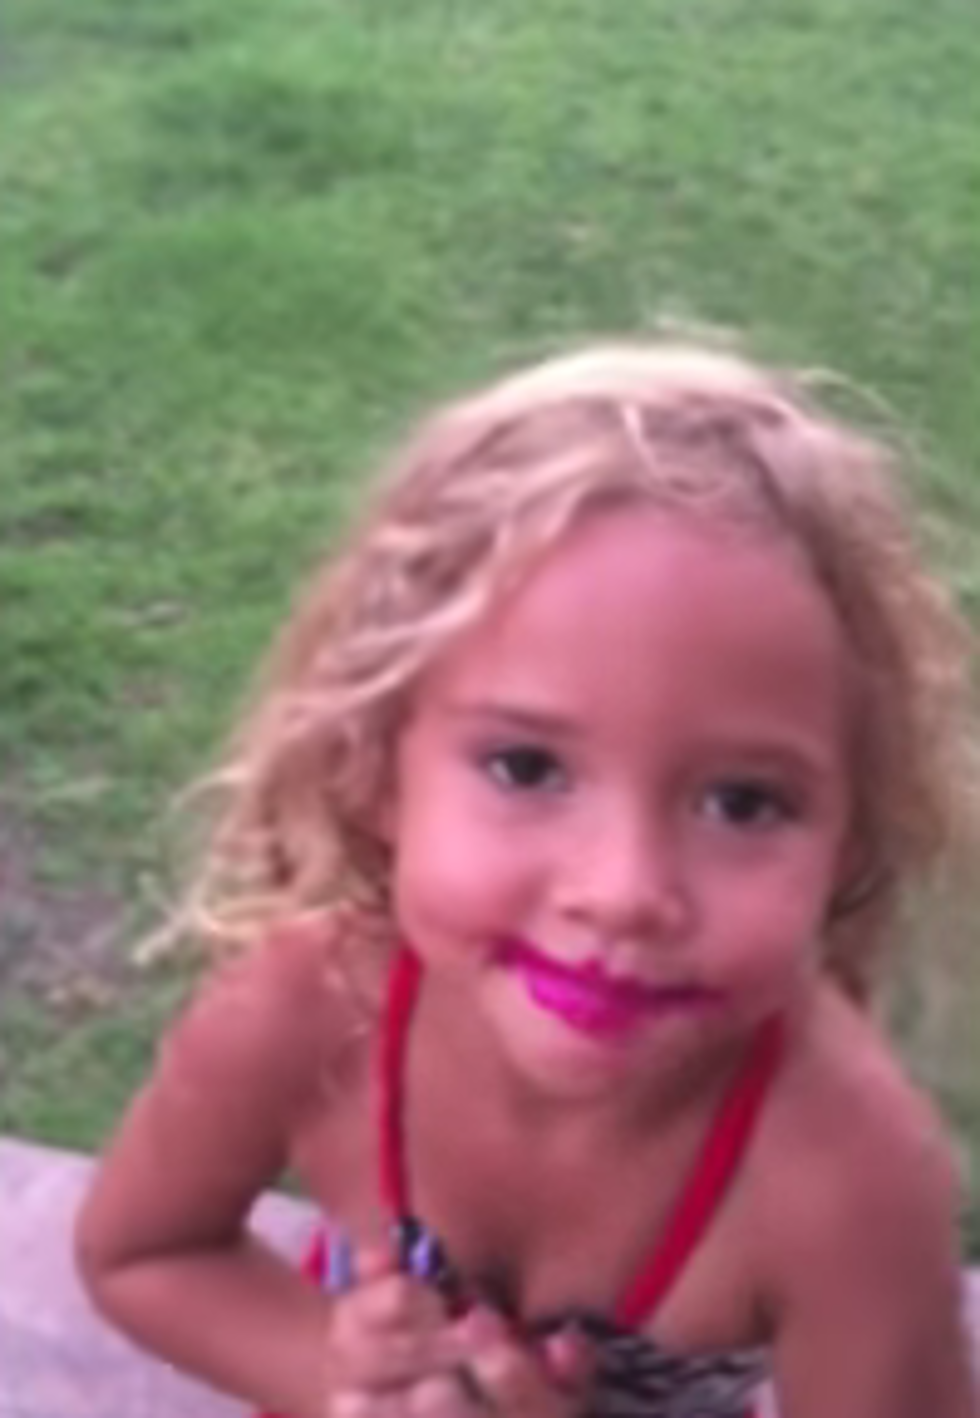 No Daddy, I Did NOT Get Into the Lipstick- Cute Video